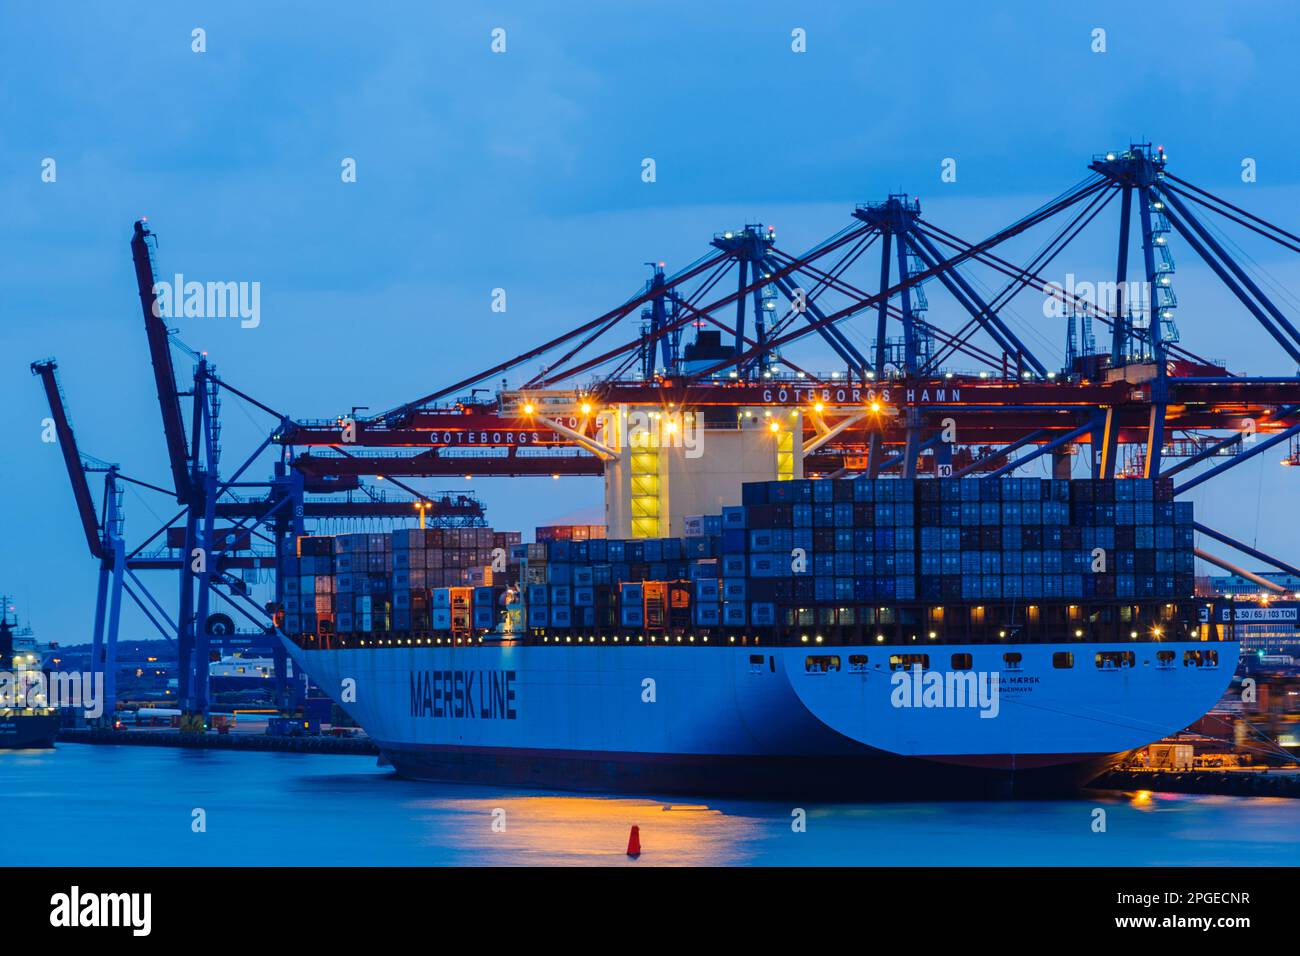 GOTHENBURG, SWEDEN - APRIL 24, 2012: Container ship docked at harbor Stock Photo